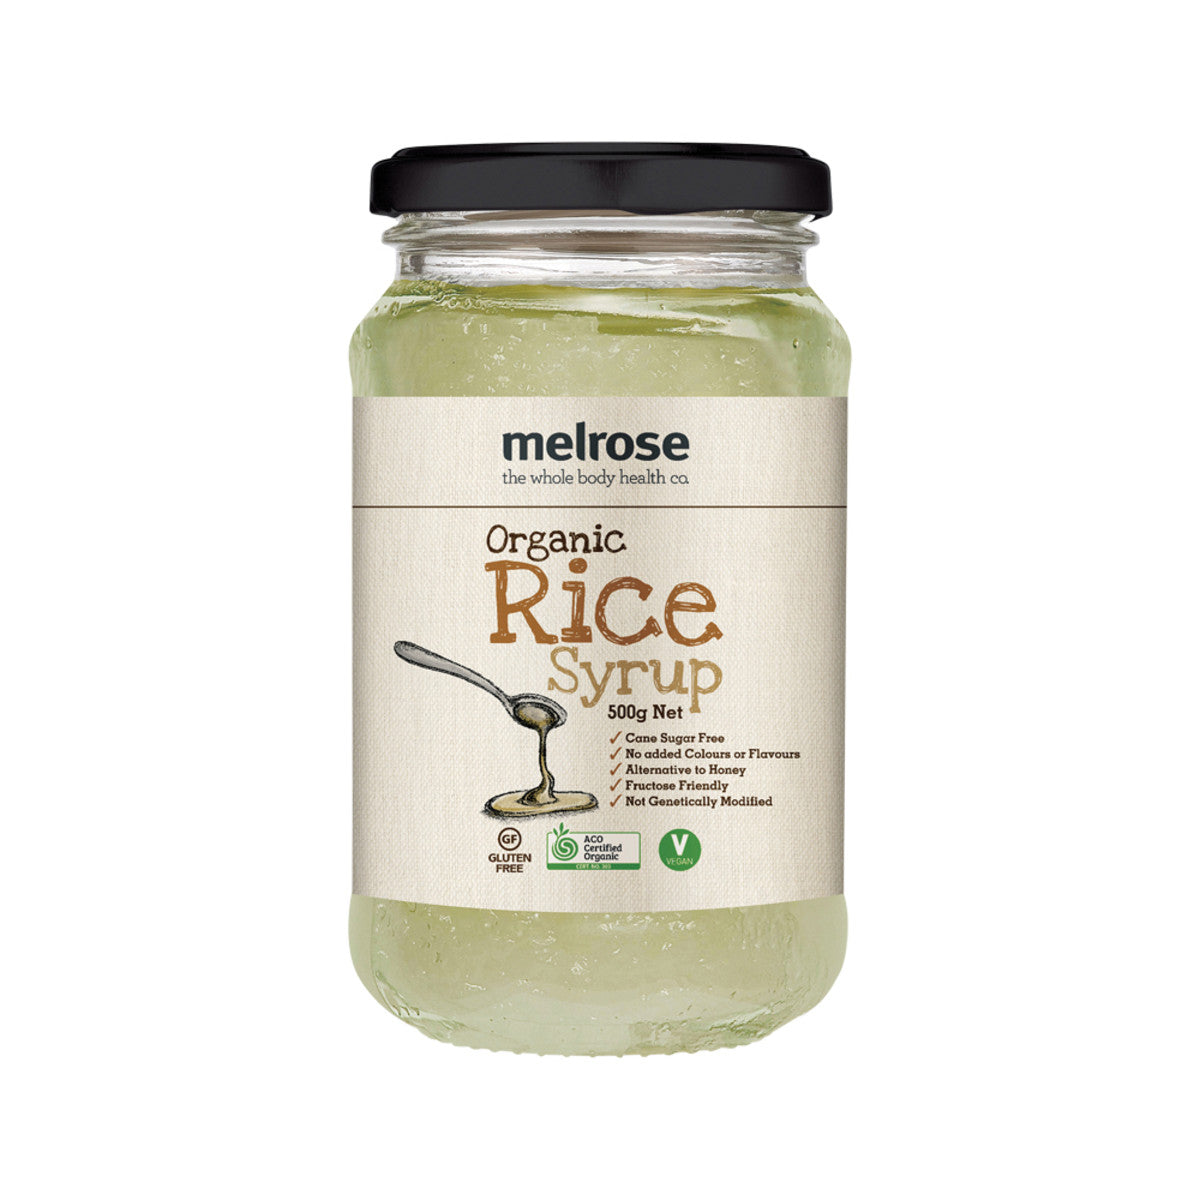 Melrose Organic Rice Syrup 500g-The Living Co.